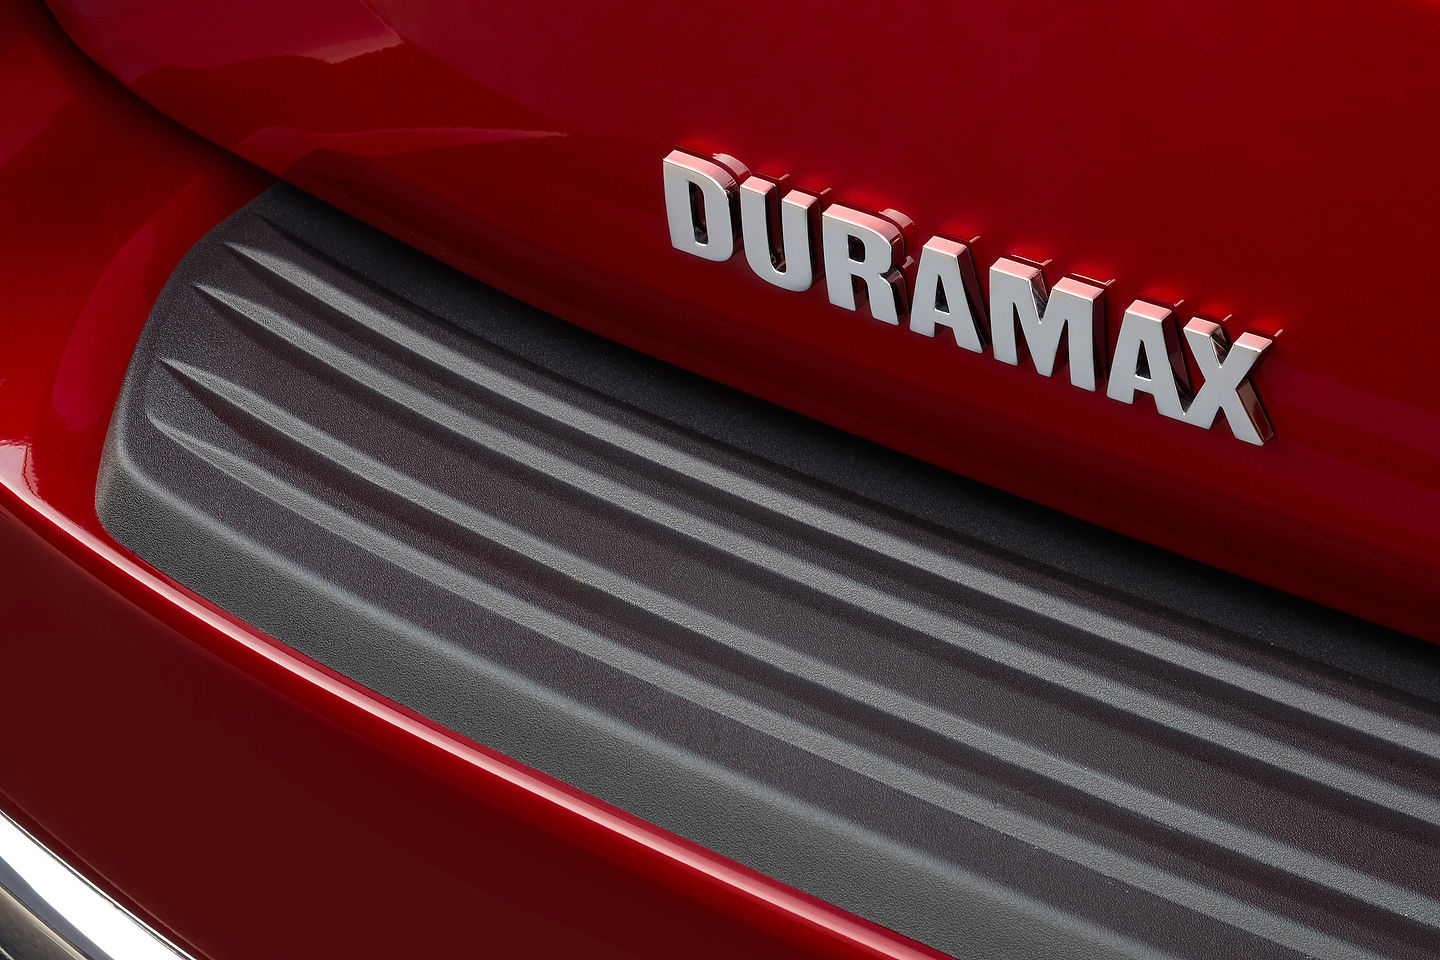 GM's Duramax diesel engine: a strong ally